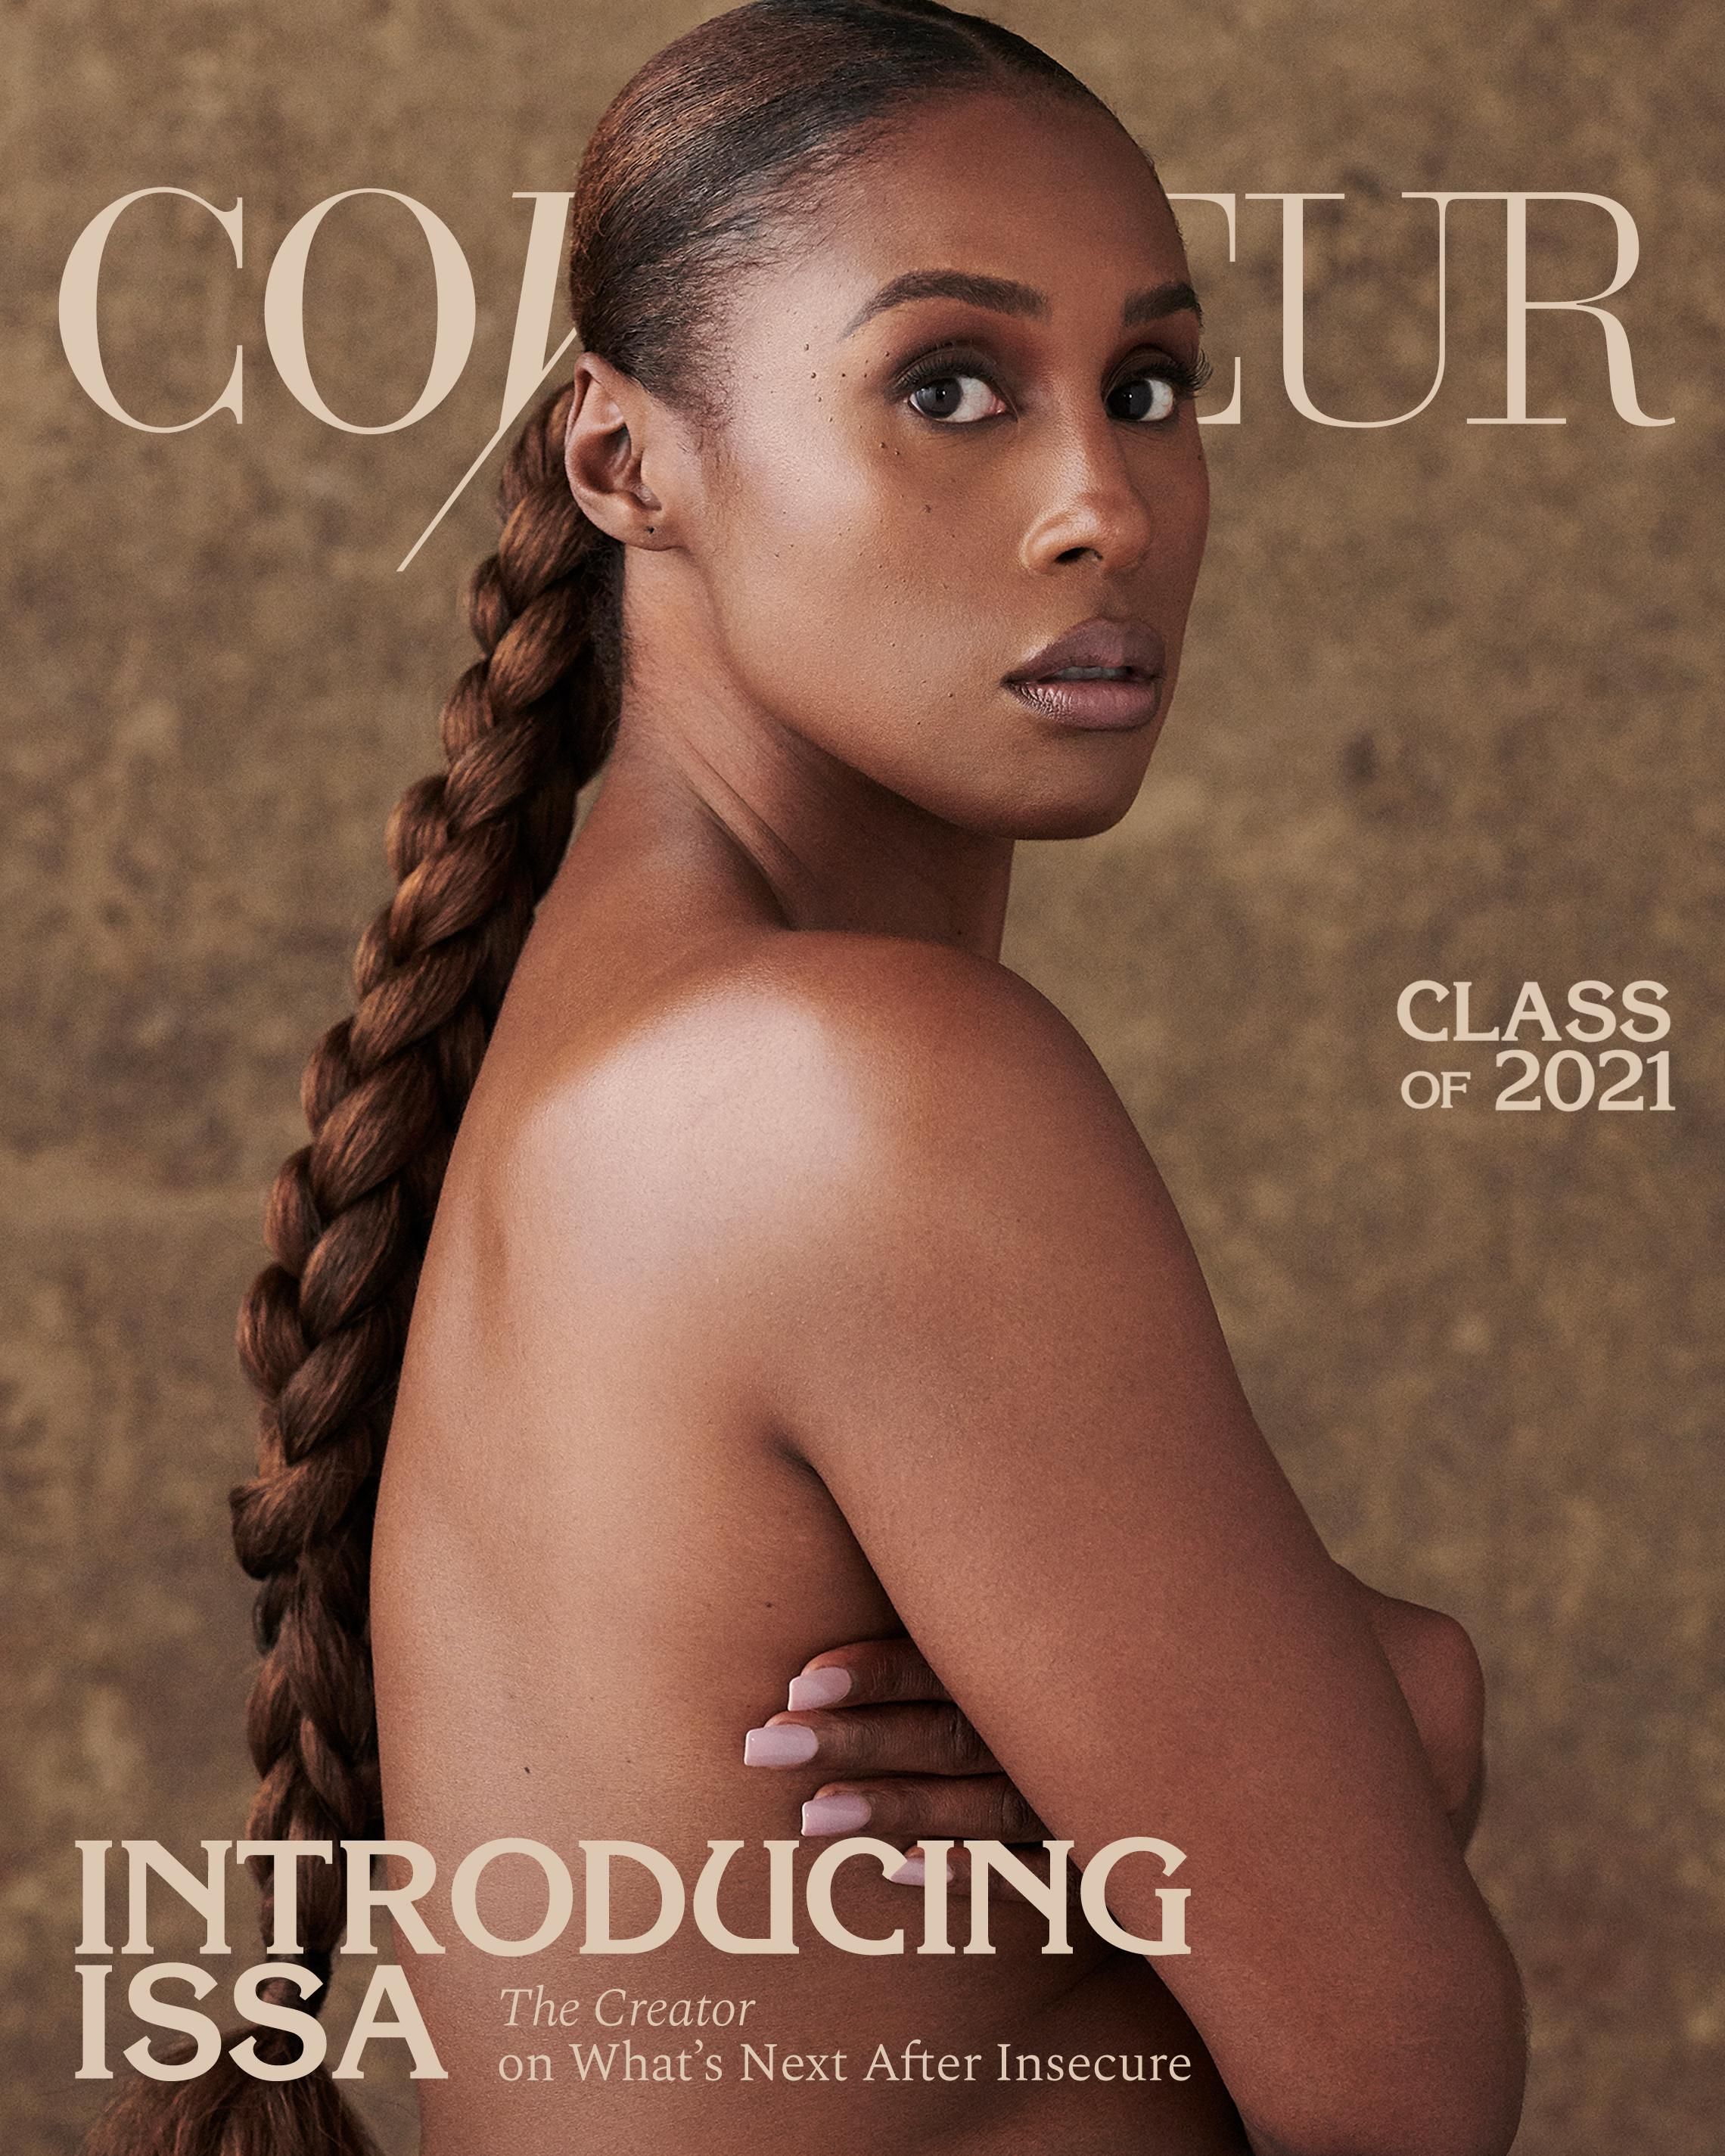 Click the cover to read the full story on Issa Rae